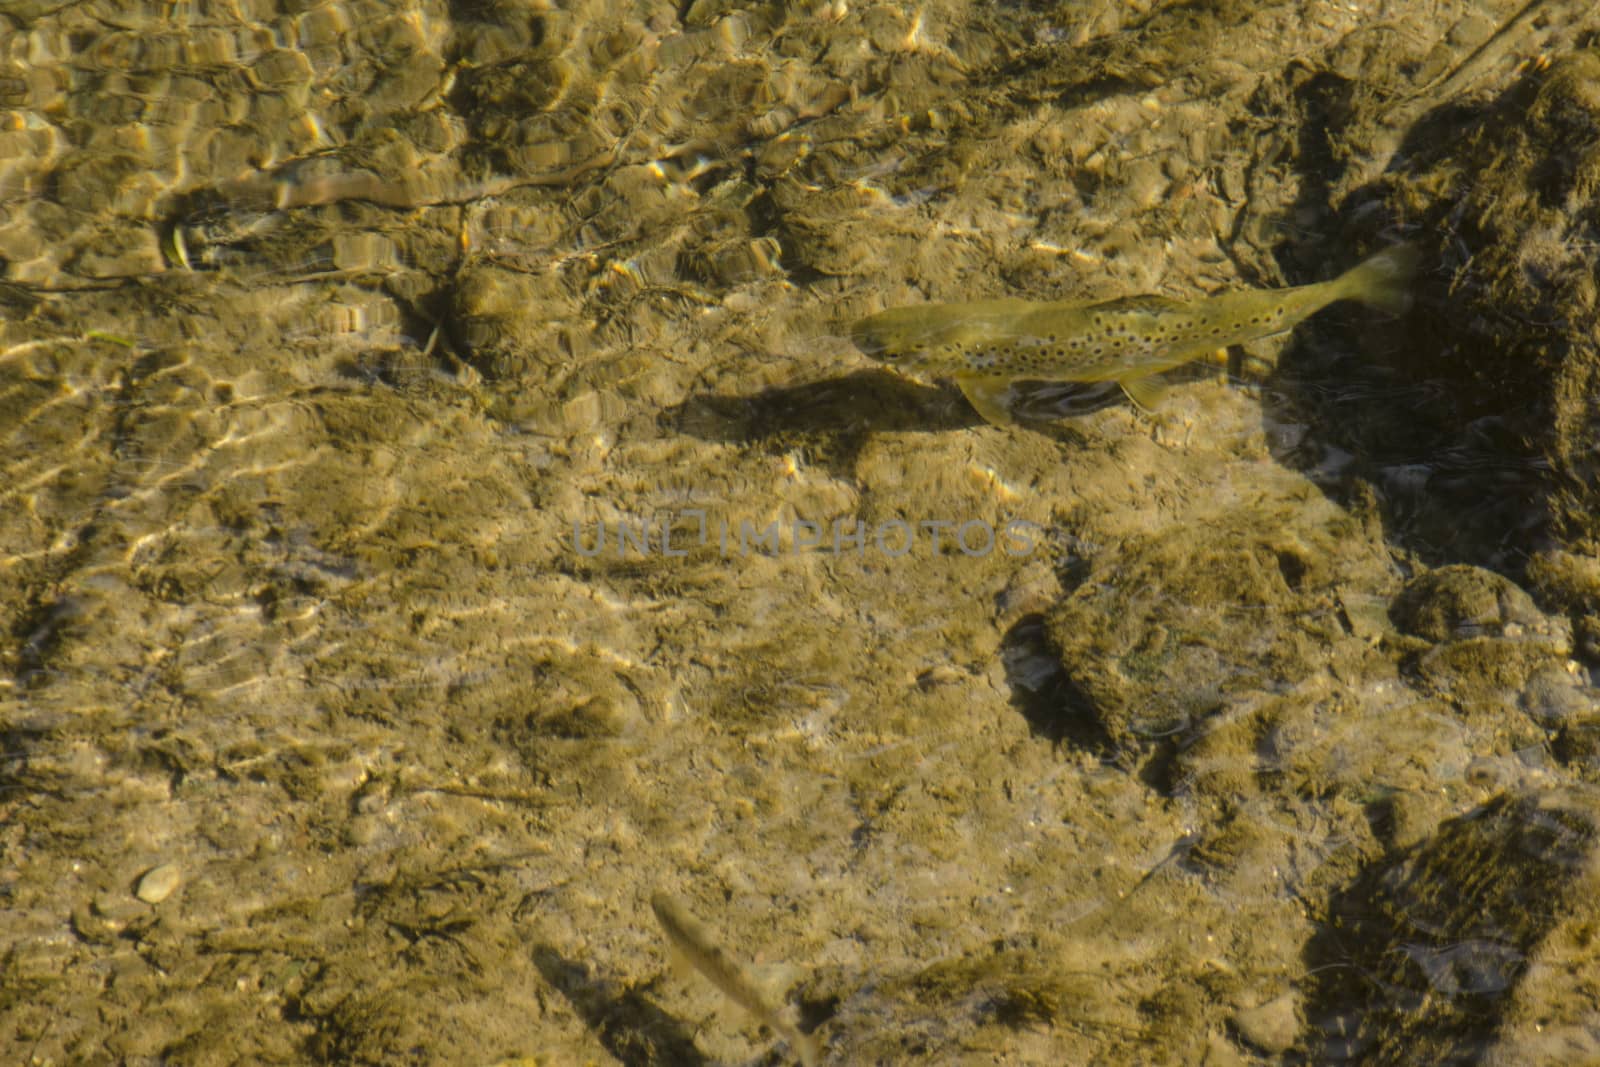 Brown trout, Salmo trutta, in a small river seen from above